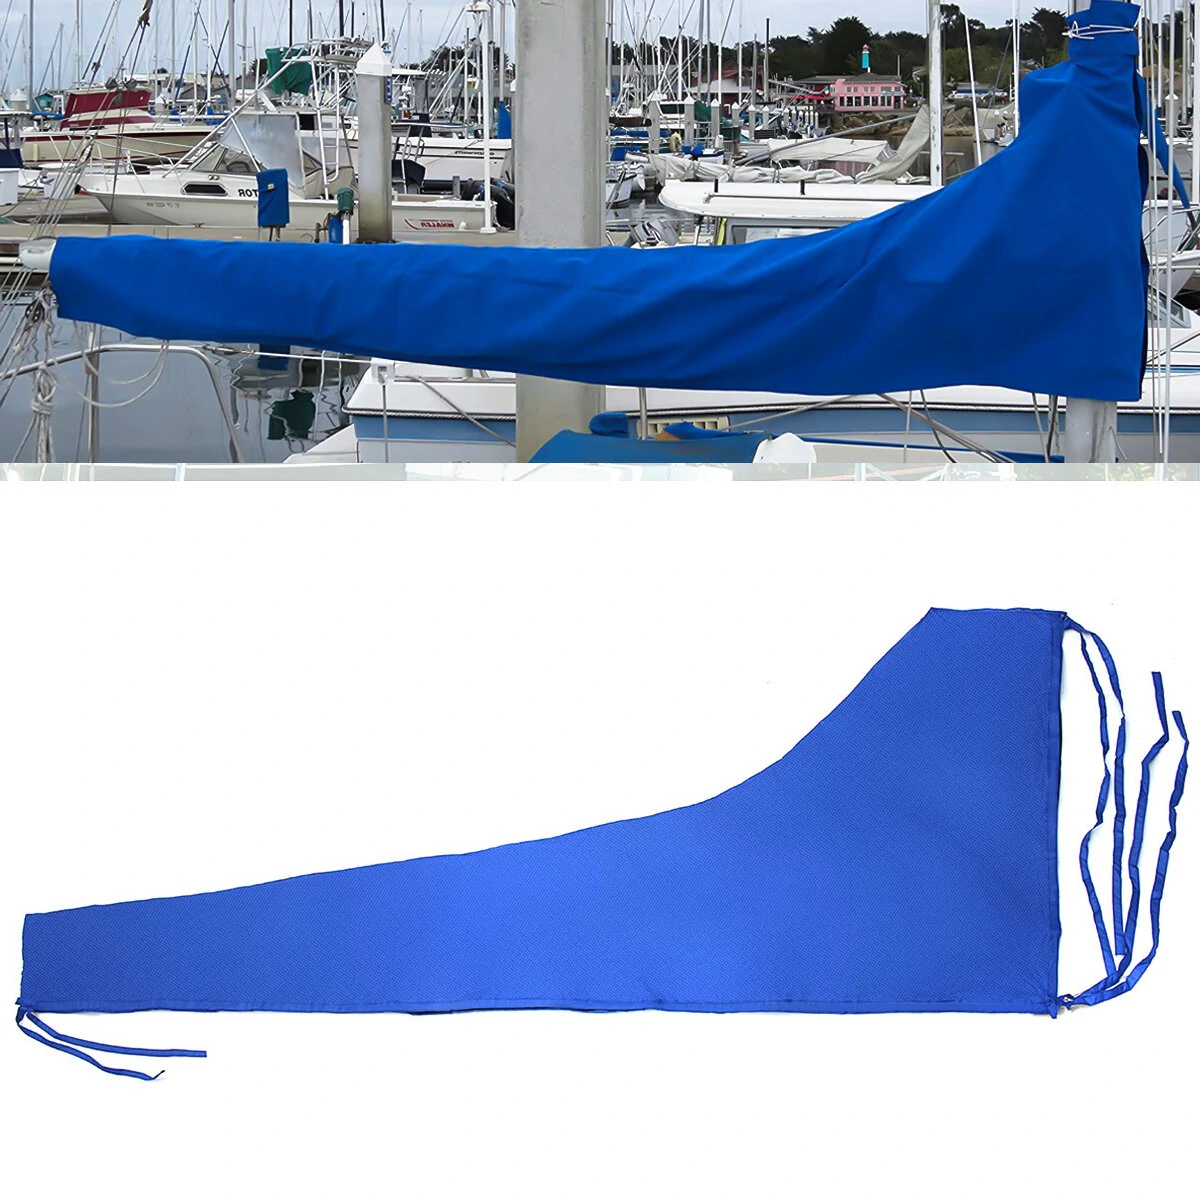 10 11ft 3.5m 420D Sail Cover Mainsail Maine Boom Cover Waterproof Fabric Blue